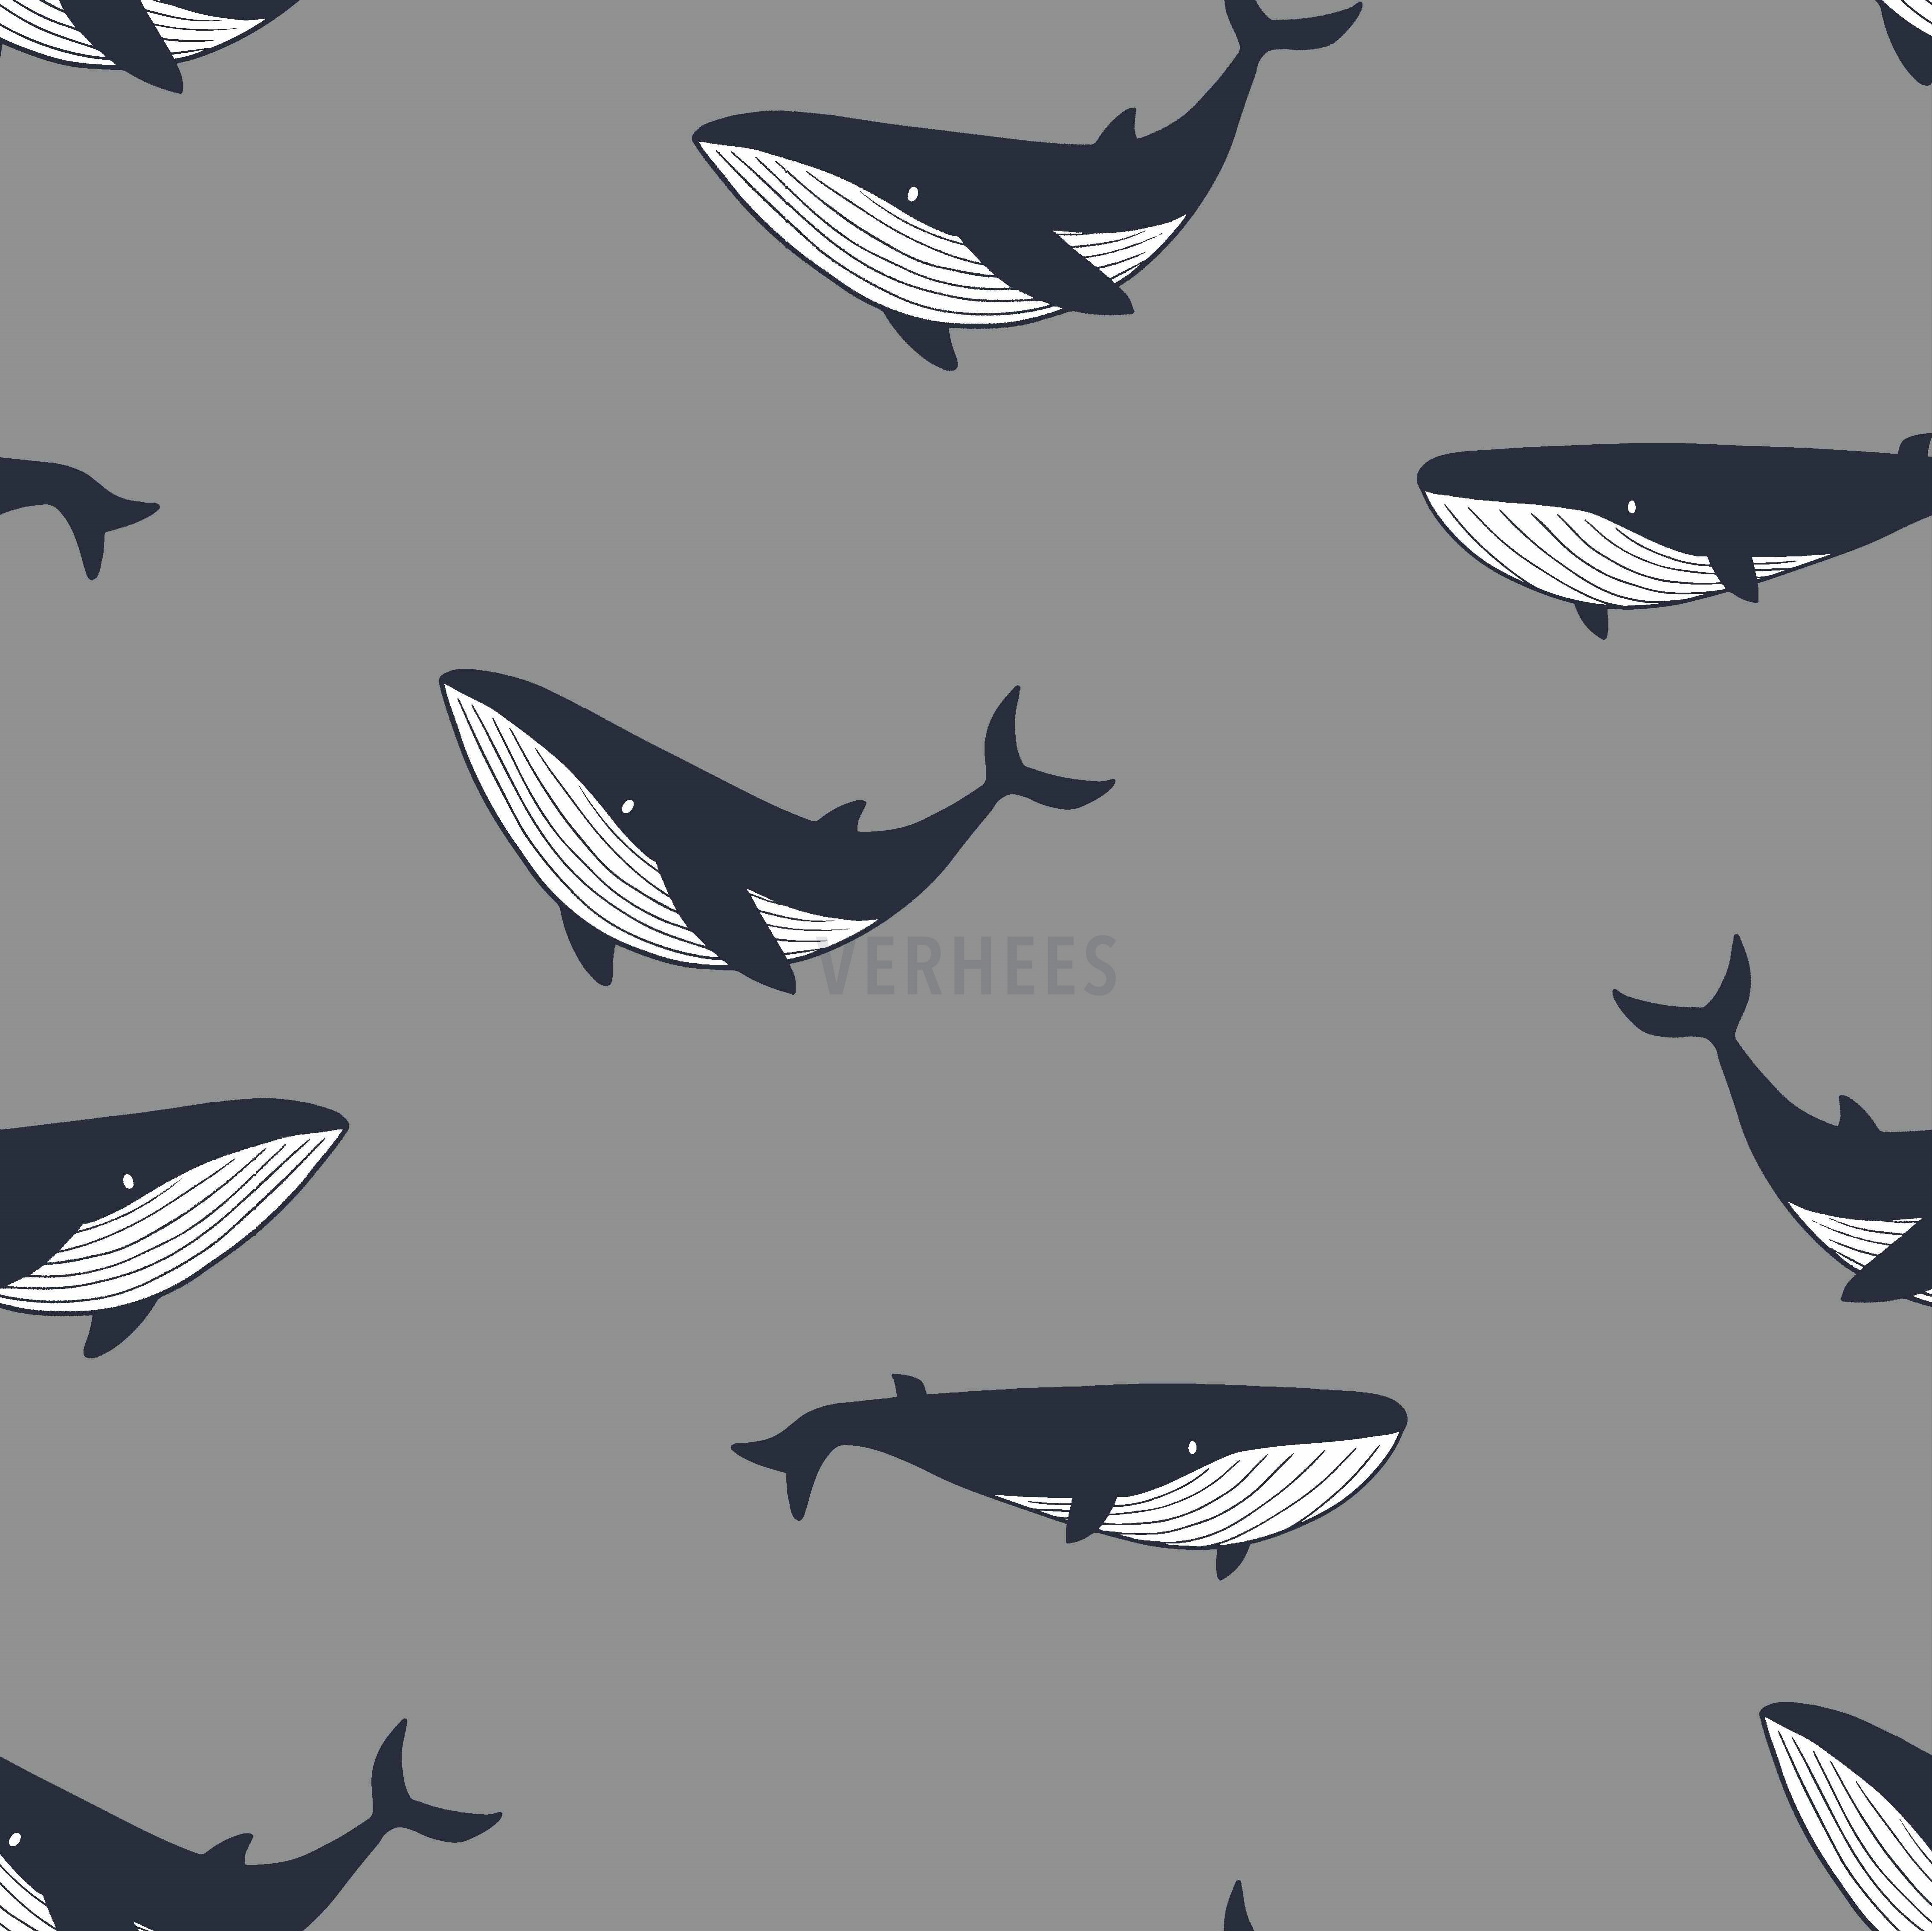 SOFT SWEAT WHALES GREY (high resolution)